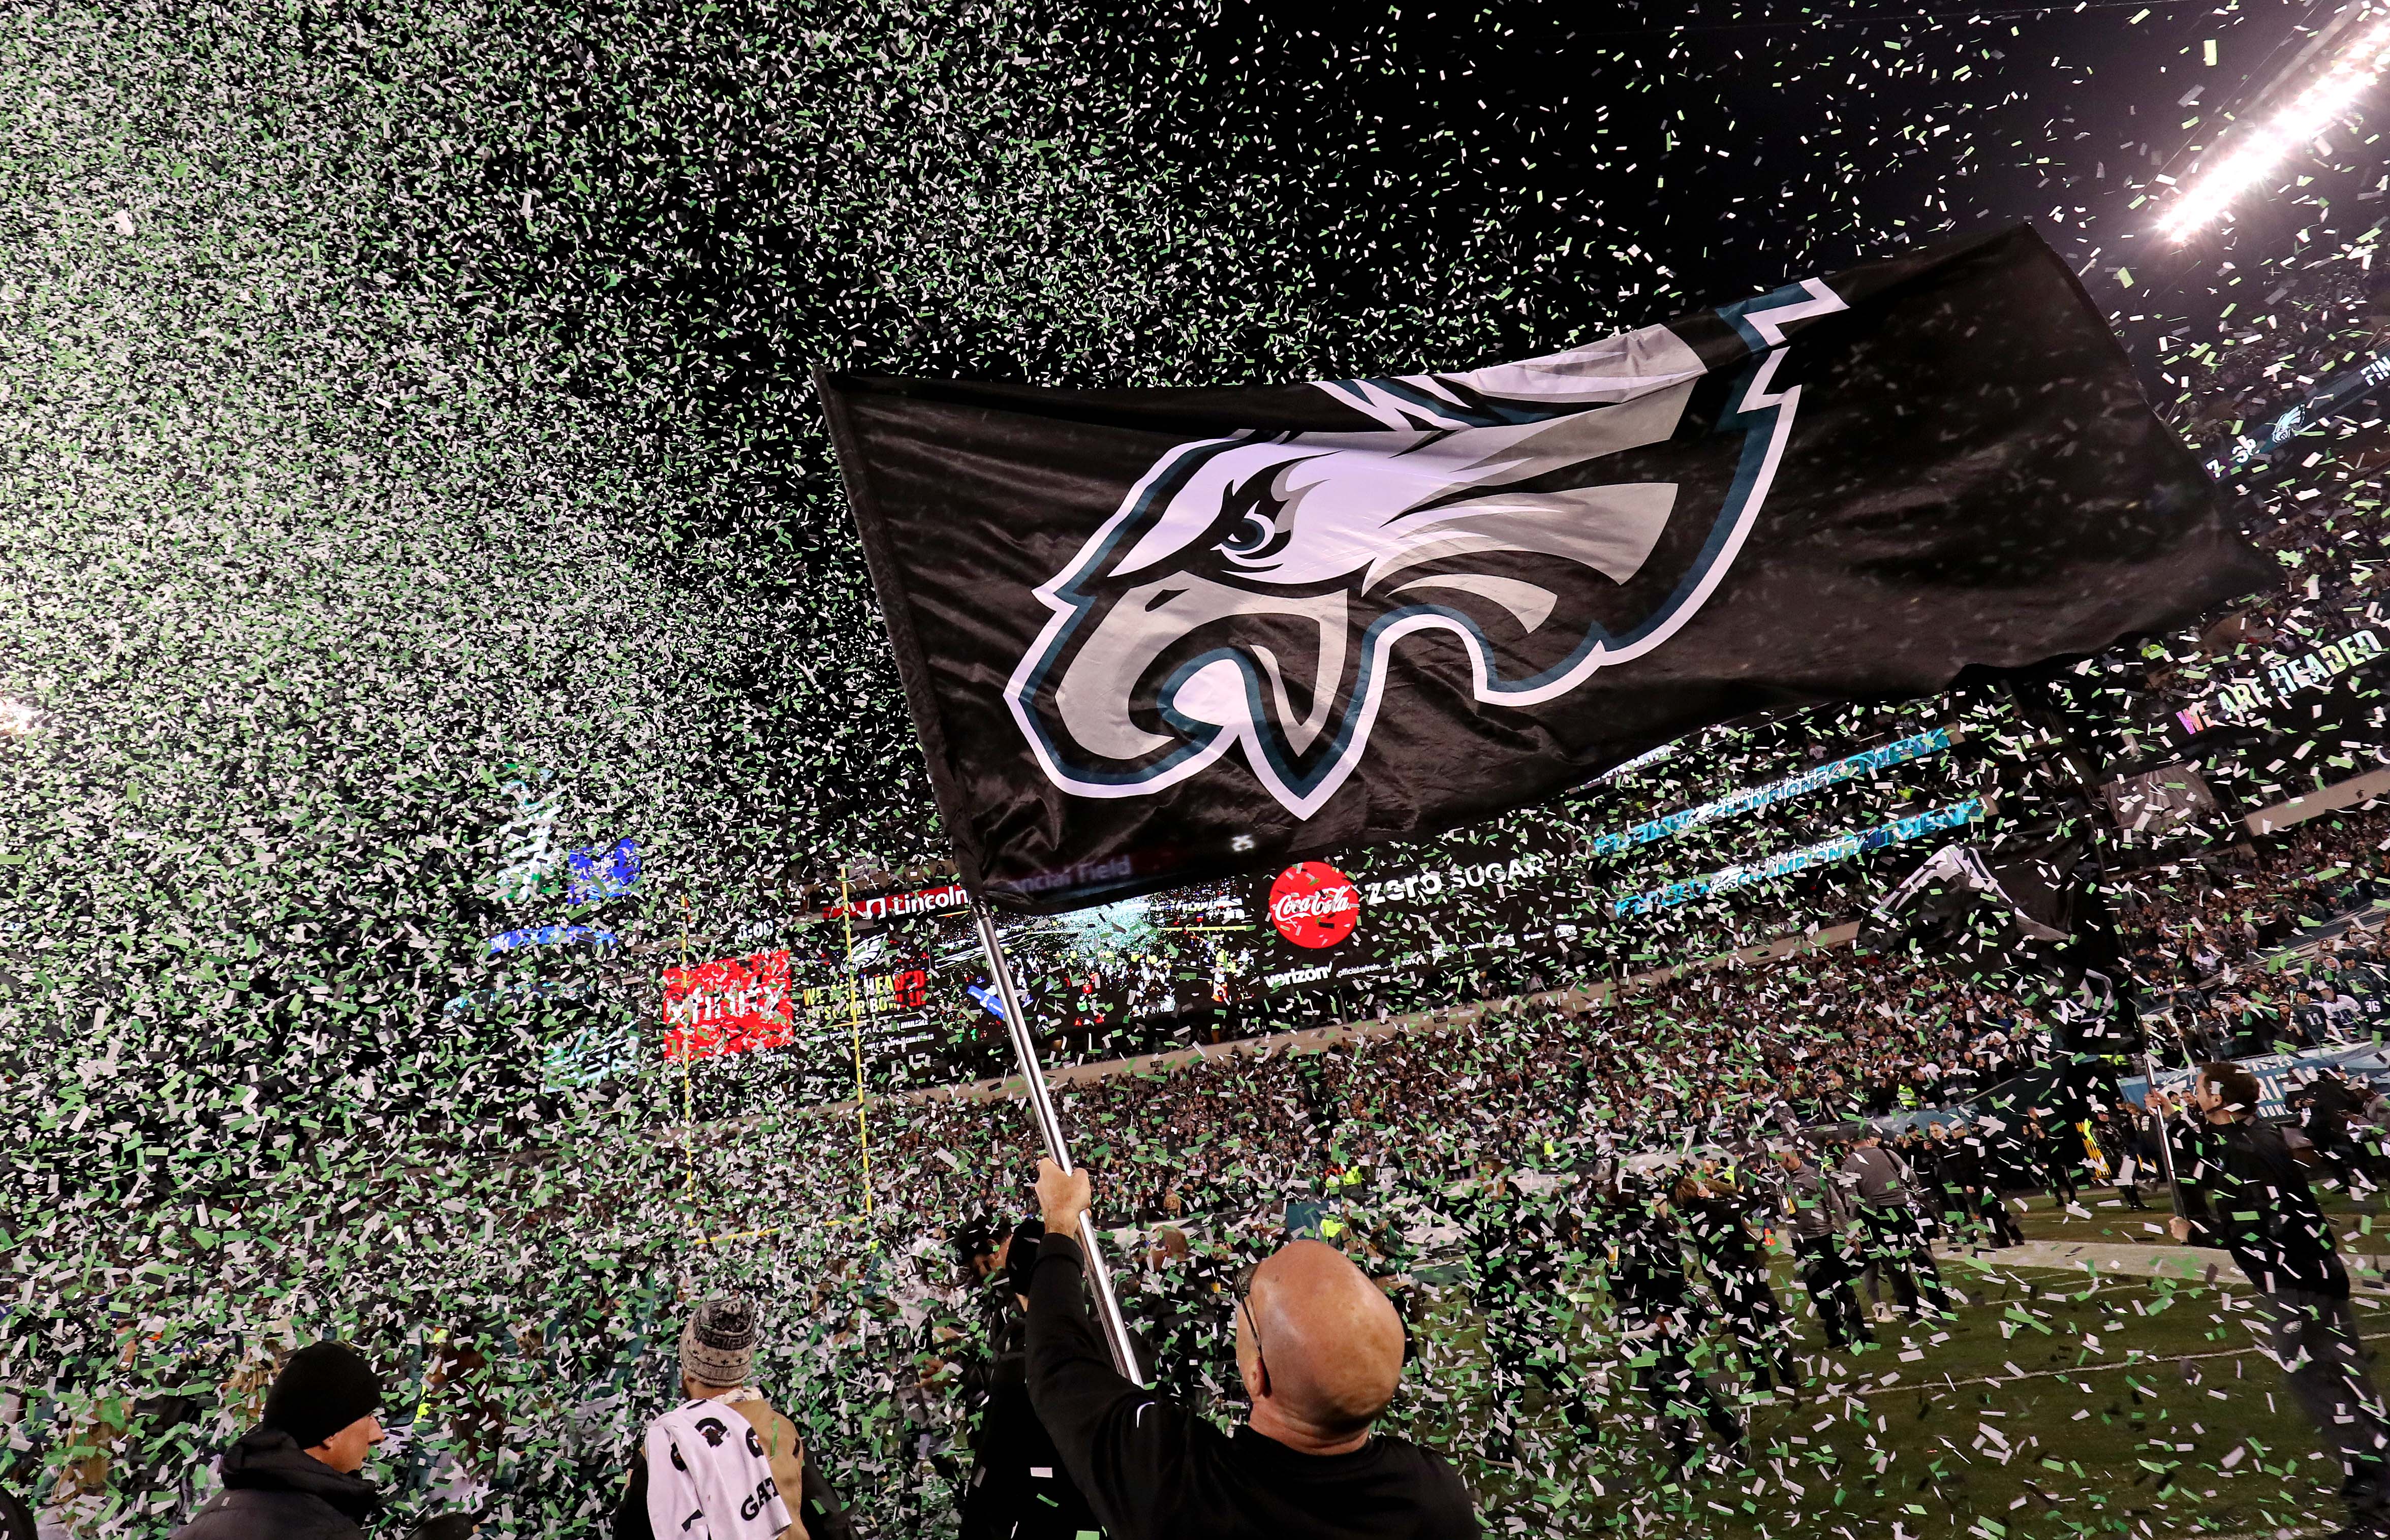 Eagles fans take to streets to celebrate after team's win